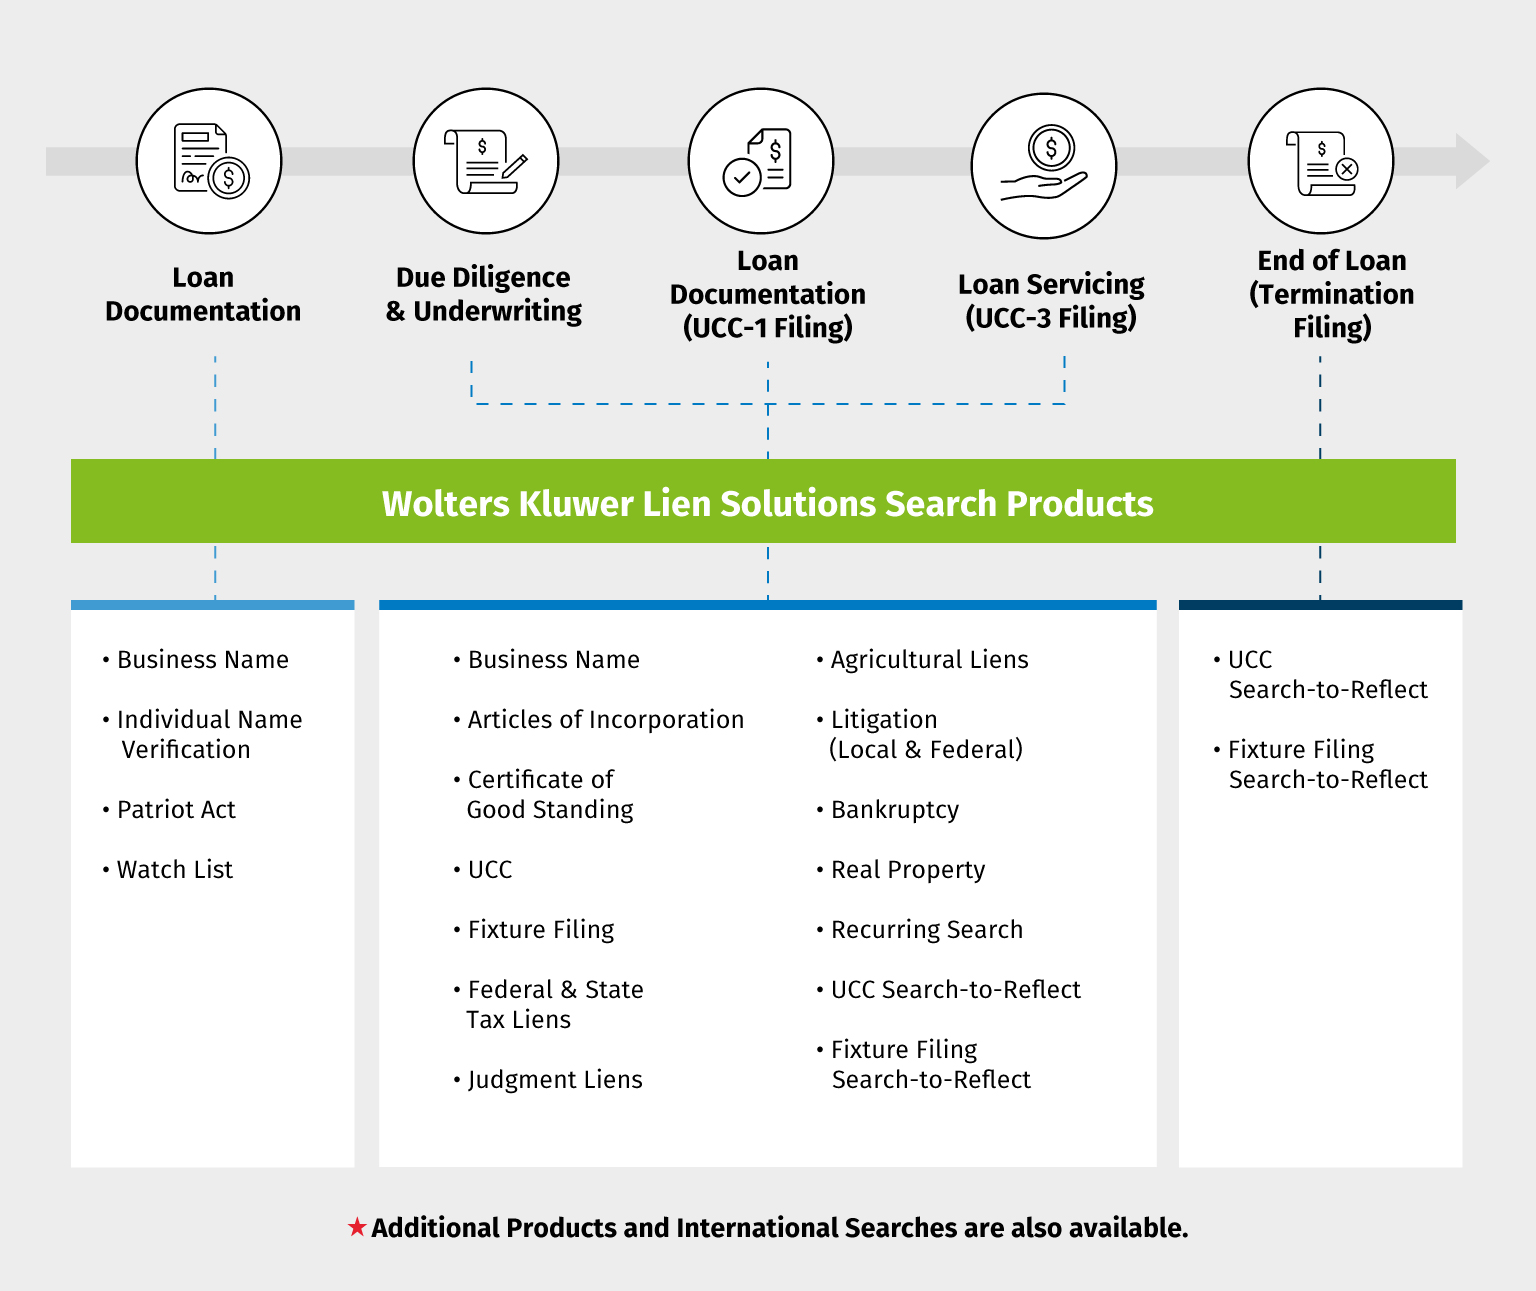 Search services in the lending lifecycle